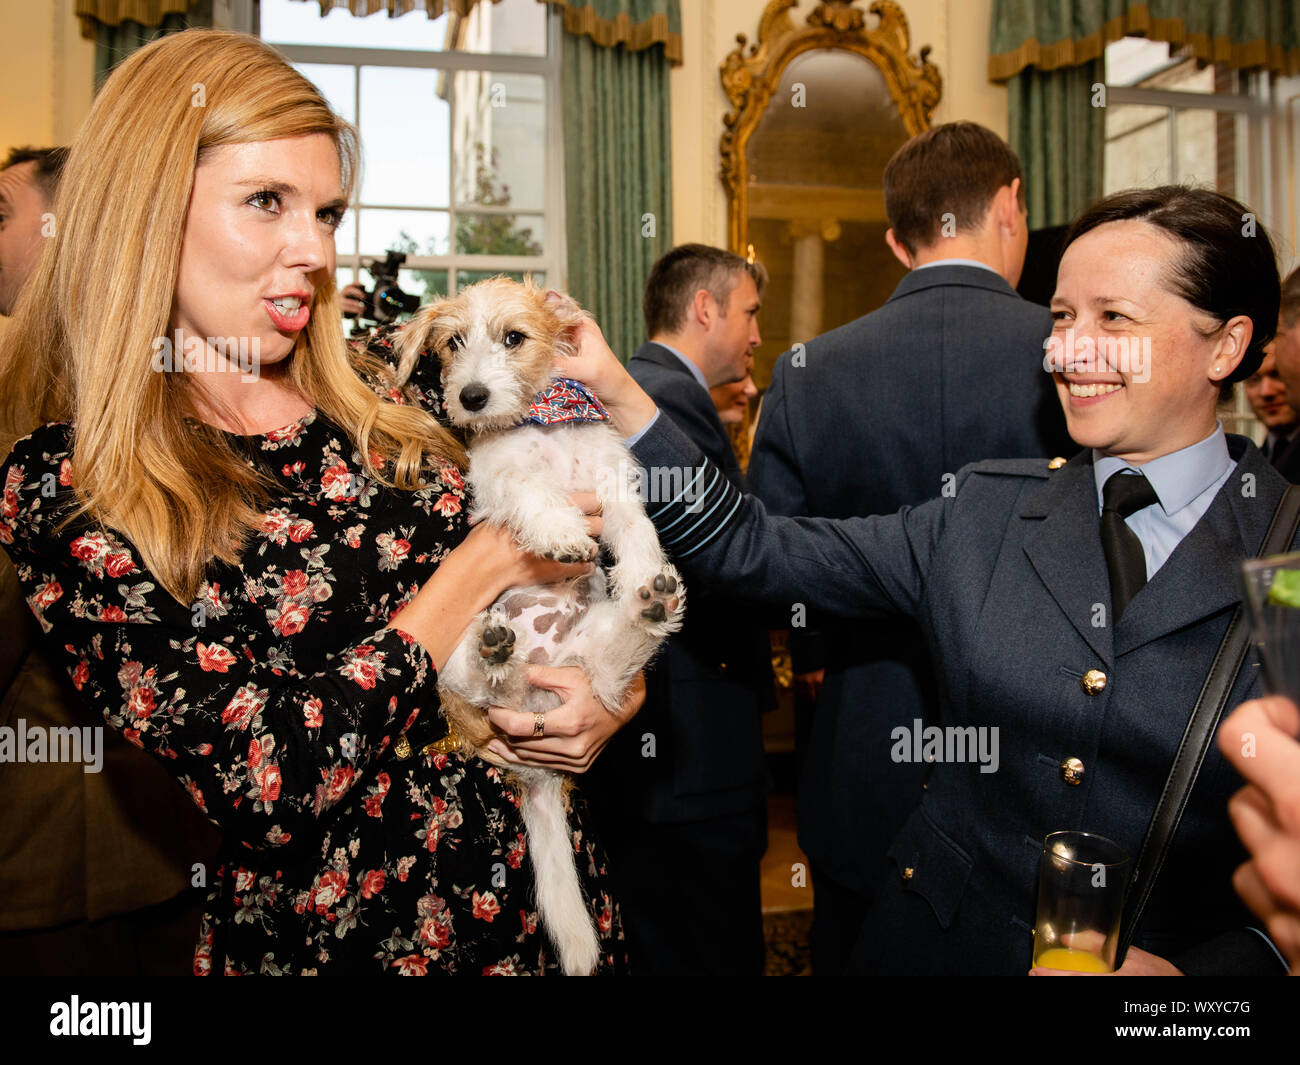 The partner of Prime Minister Boris Johnson, Carrie Symonds (left),  introduces guests to Dilyn the Jack Russell, their dog, as the Prime  Minister hosts a military reception at 10 Downing Street, London